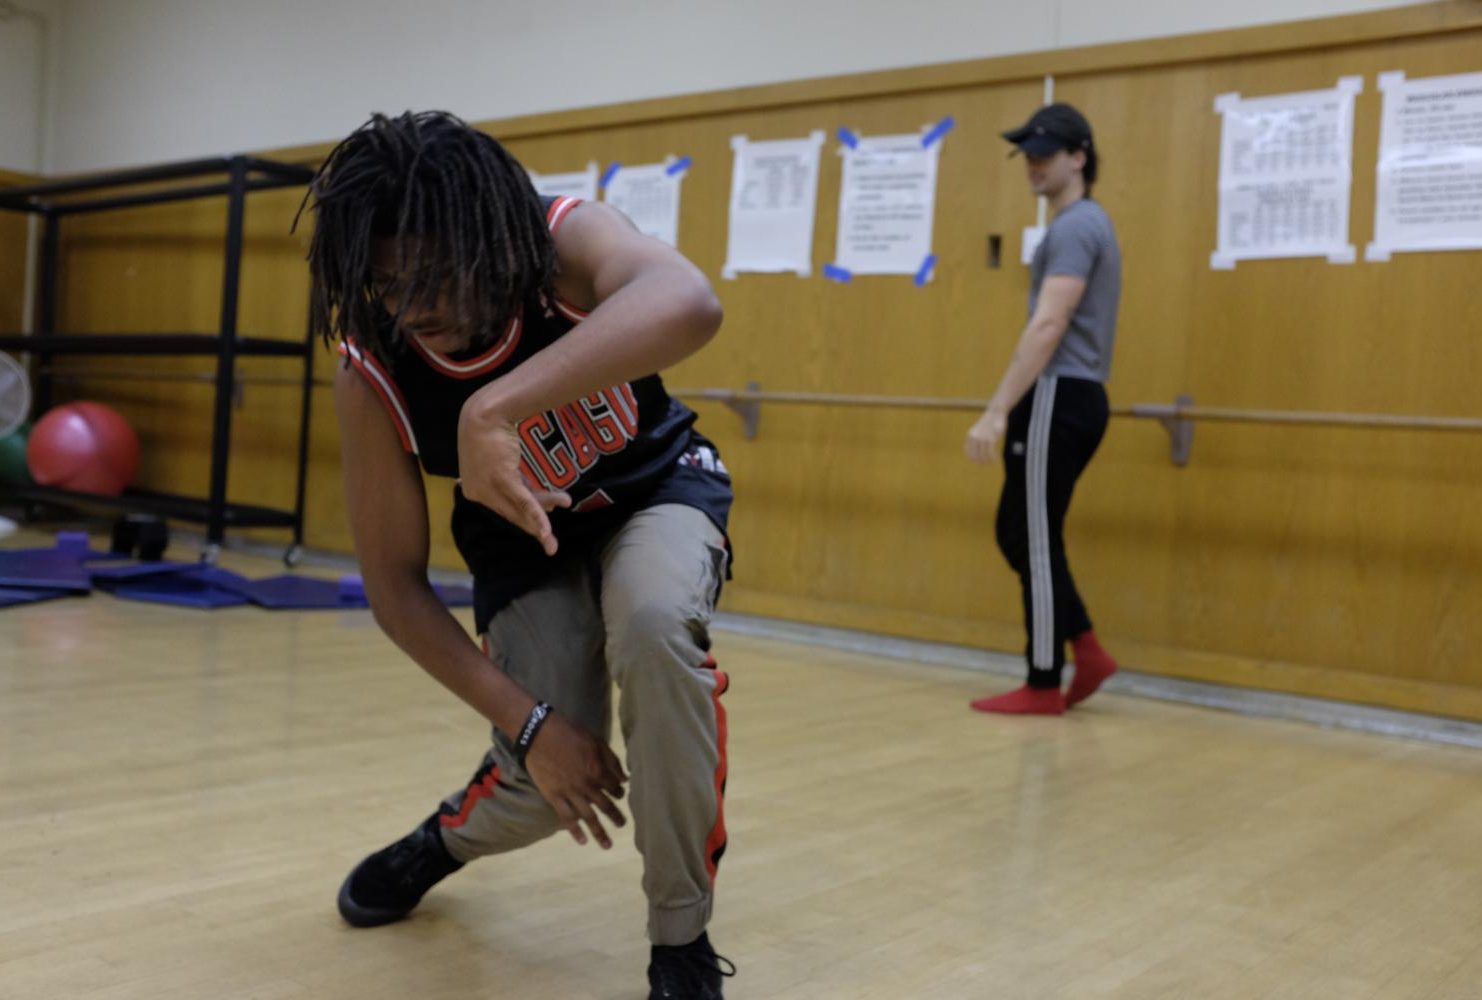 Latraye Allen, dance major, practices hip-hop dance moves in the second dance studio at American River College on Feb. 6, 2019. (Photo by Patrick Hyun Wilson)